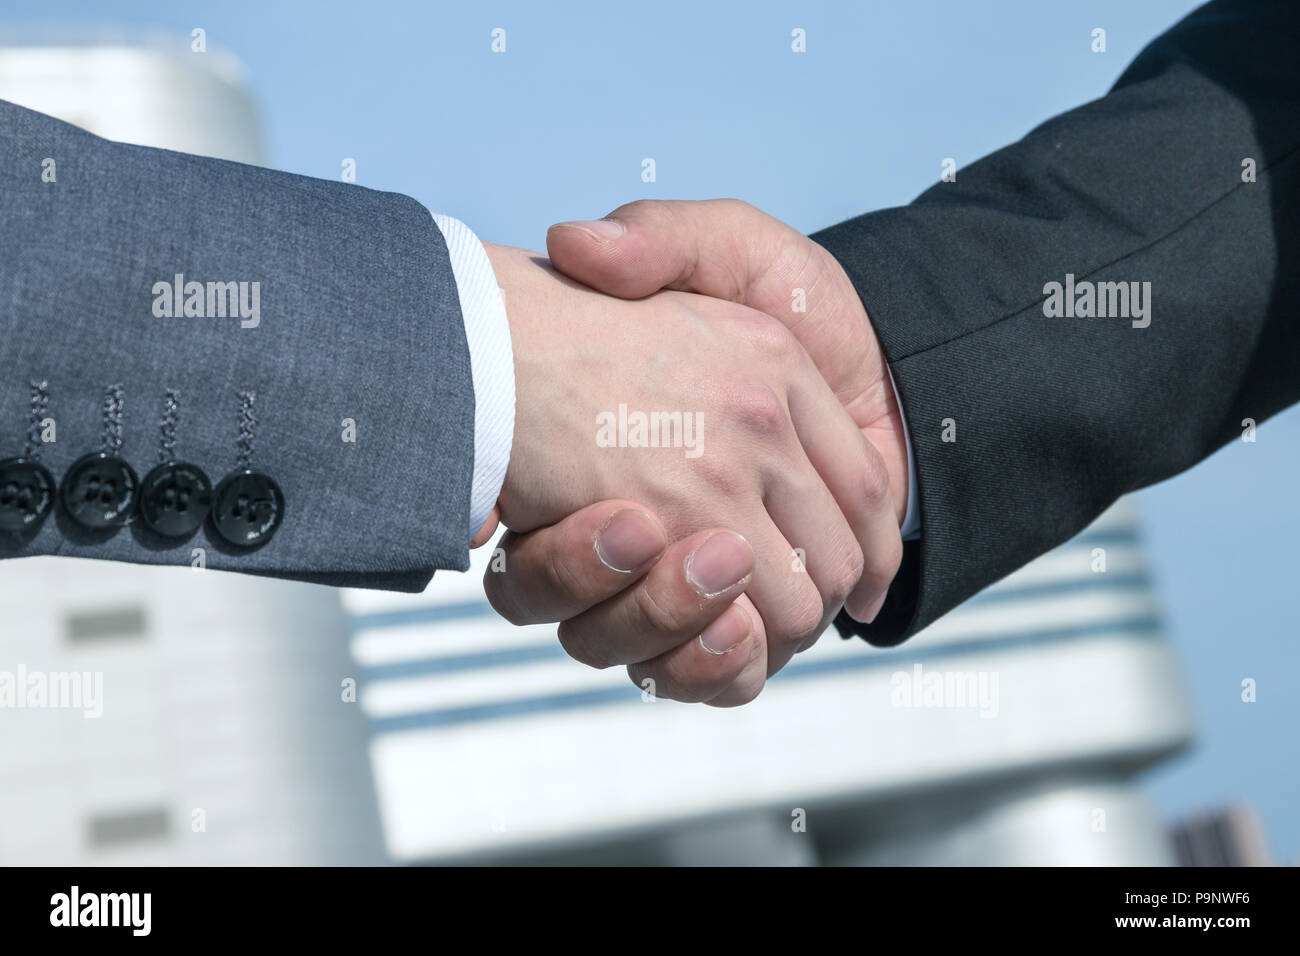 Asian business people shaking hands Stock Photo